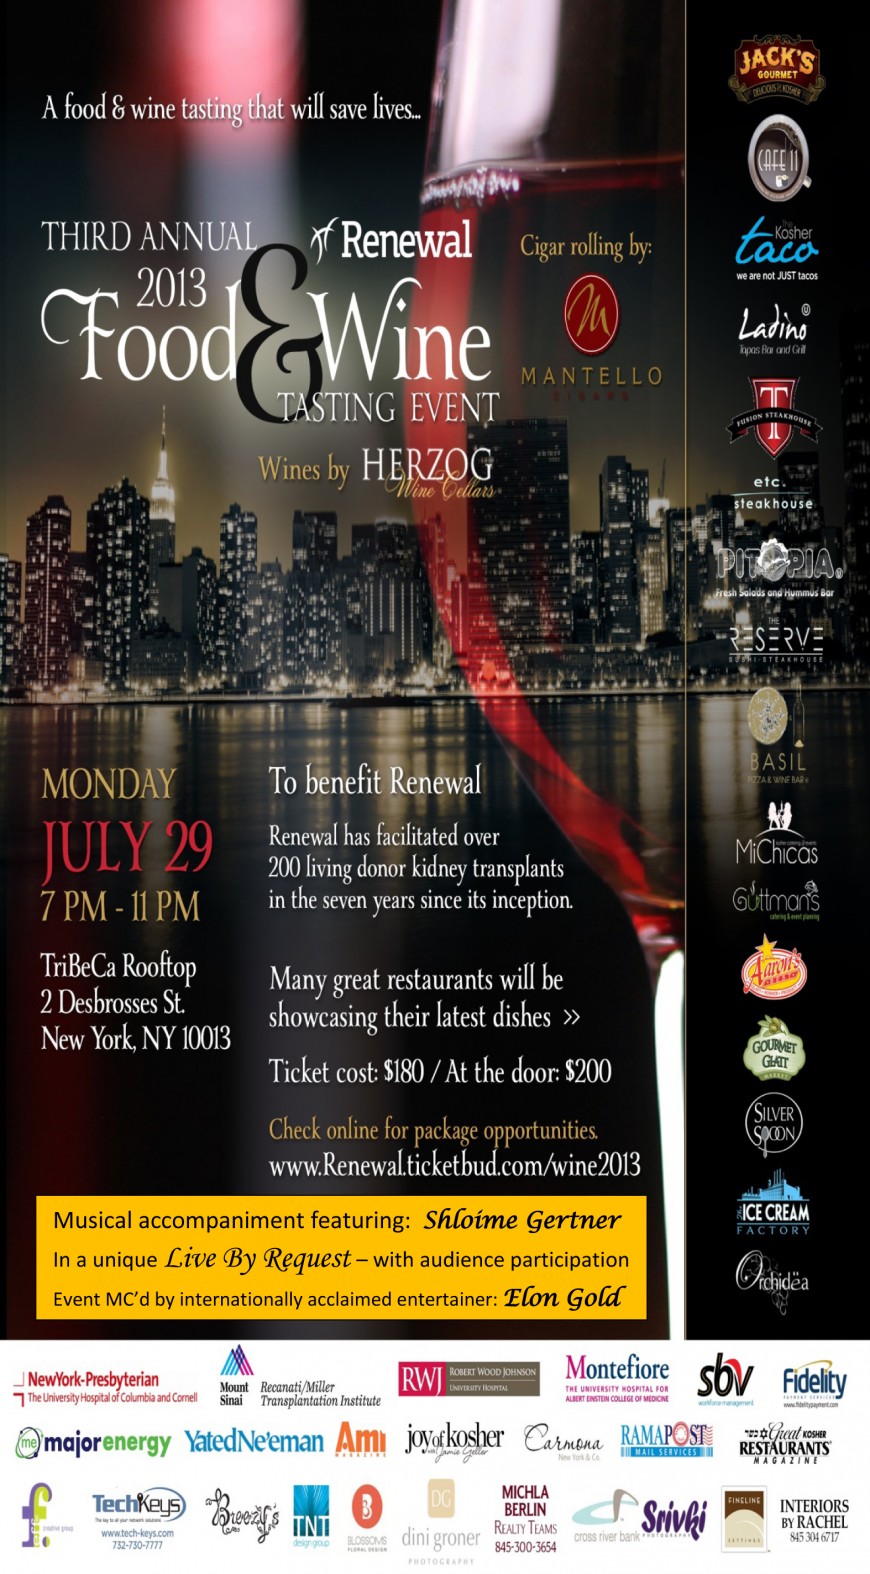 3rd Annual Food & Wine Event to benefit Renewal